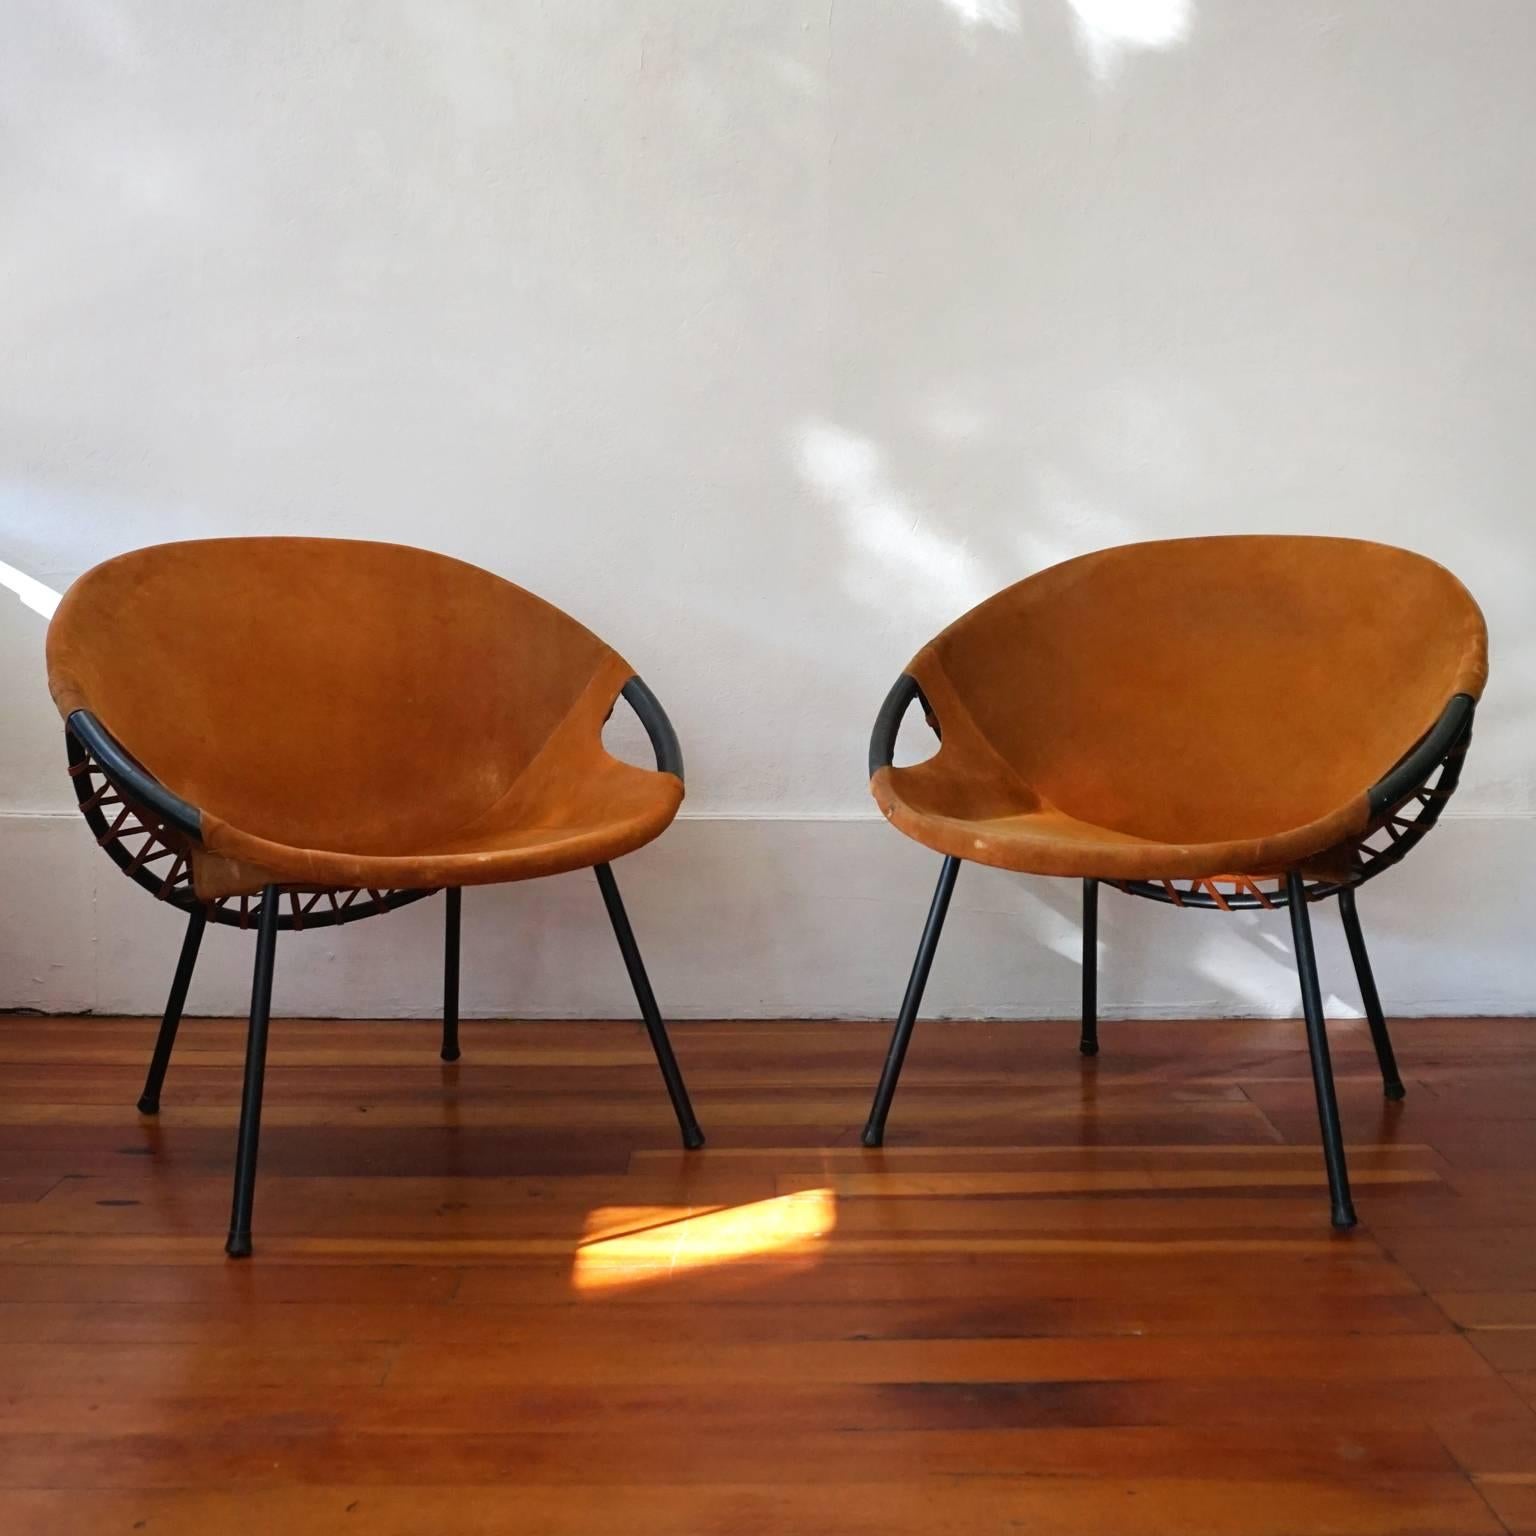 A pair of suede leather and metal frame chairs from the 1960s.